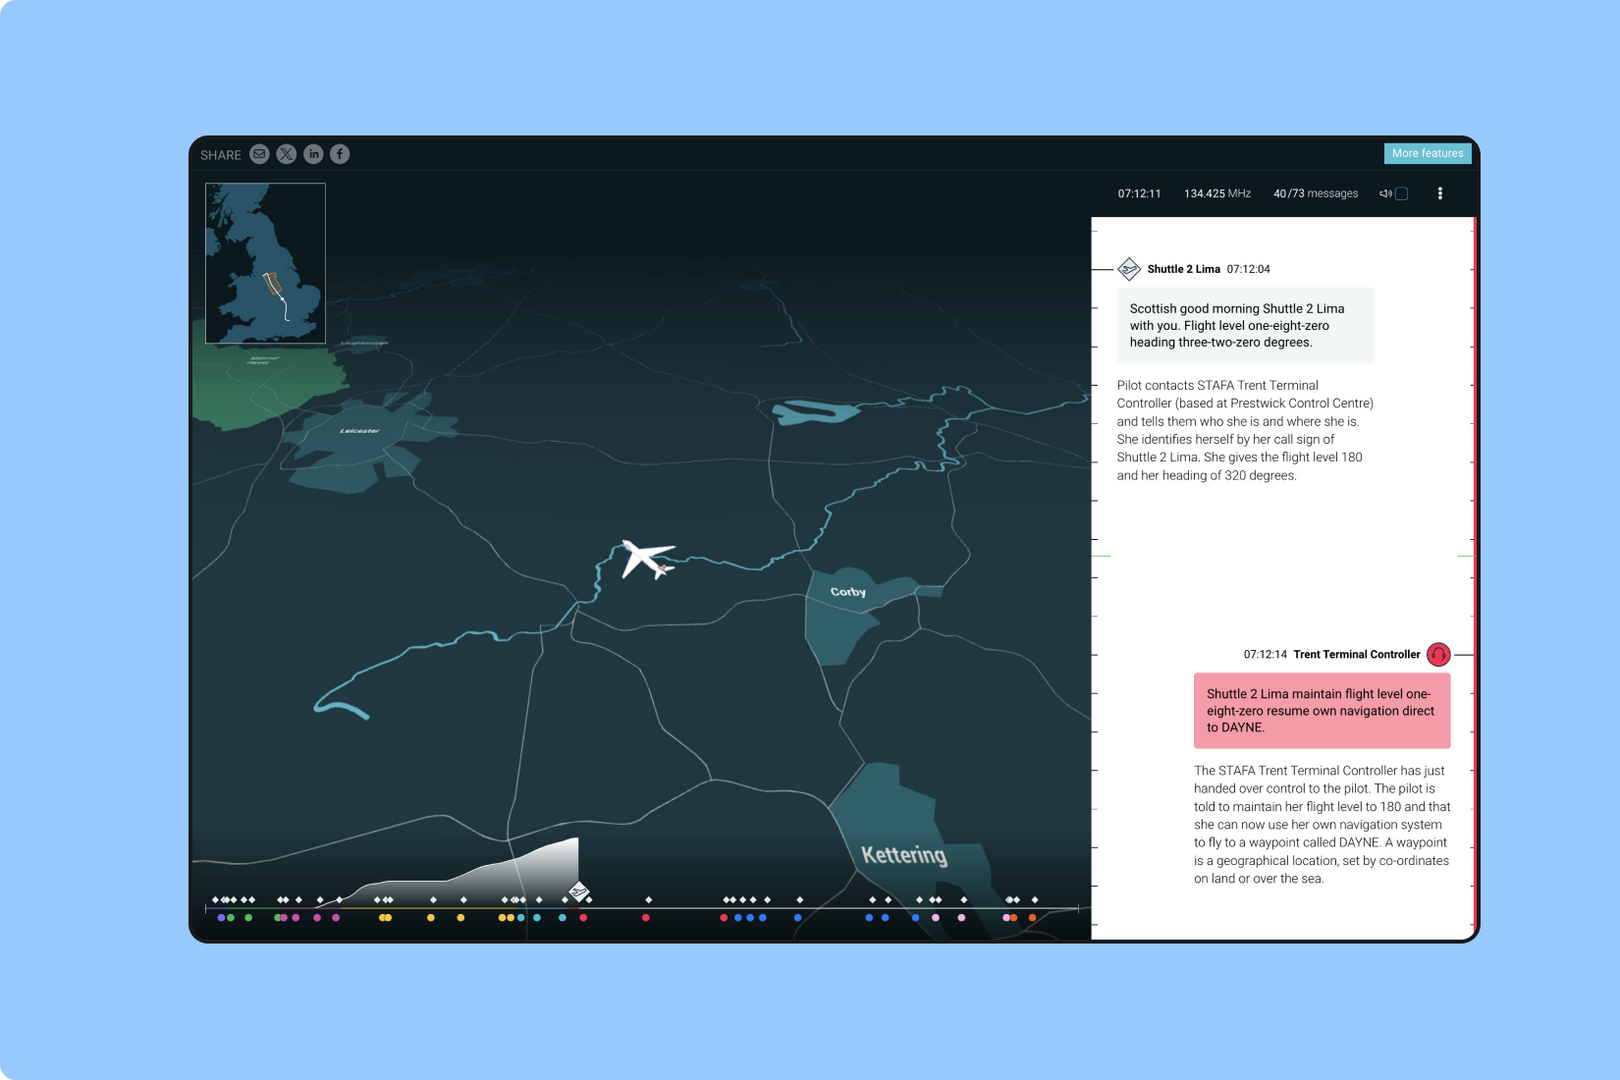 A screenshot from the plane talking website. On the left is a graphic of a plane flying over the UK. On the right is text showing the conversations of air traffic controllers during the flight.